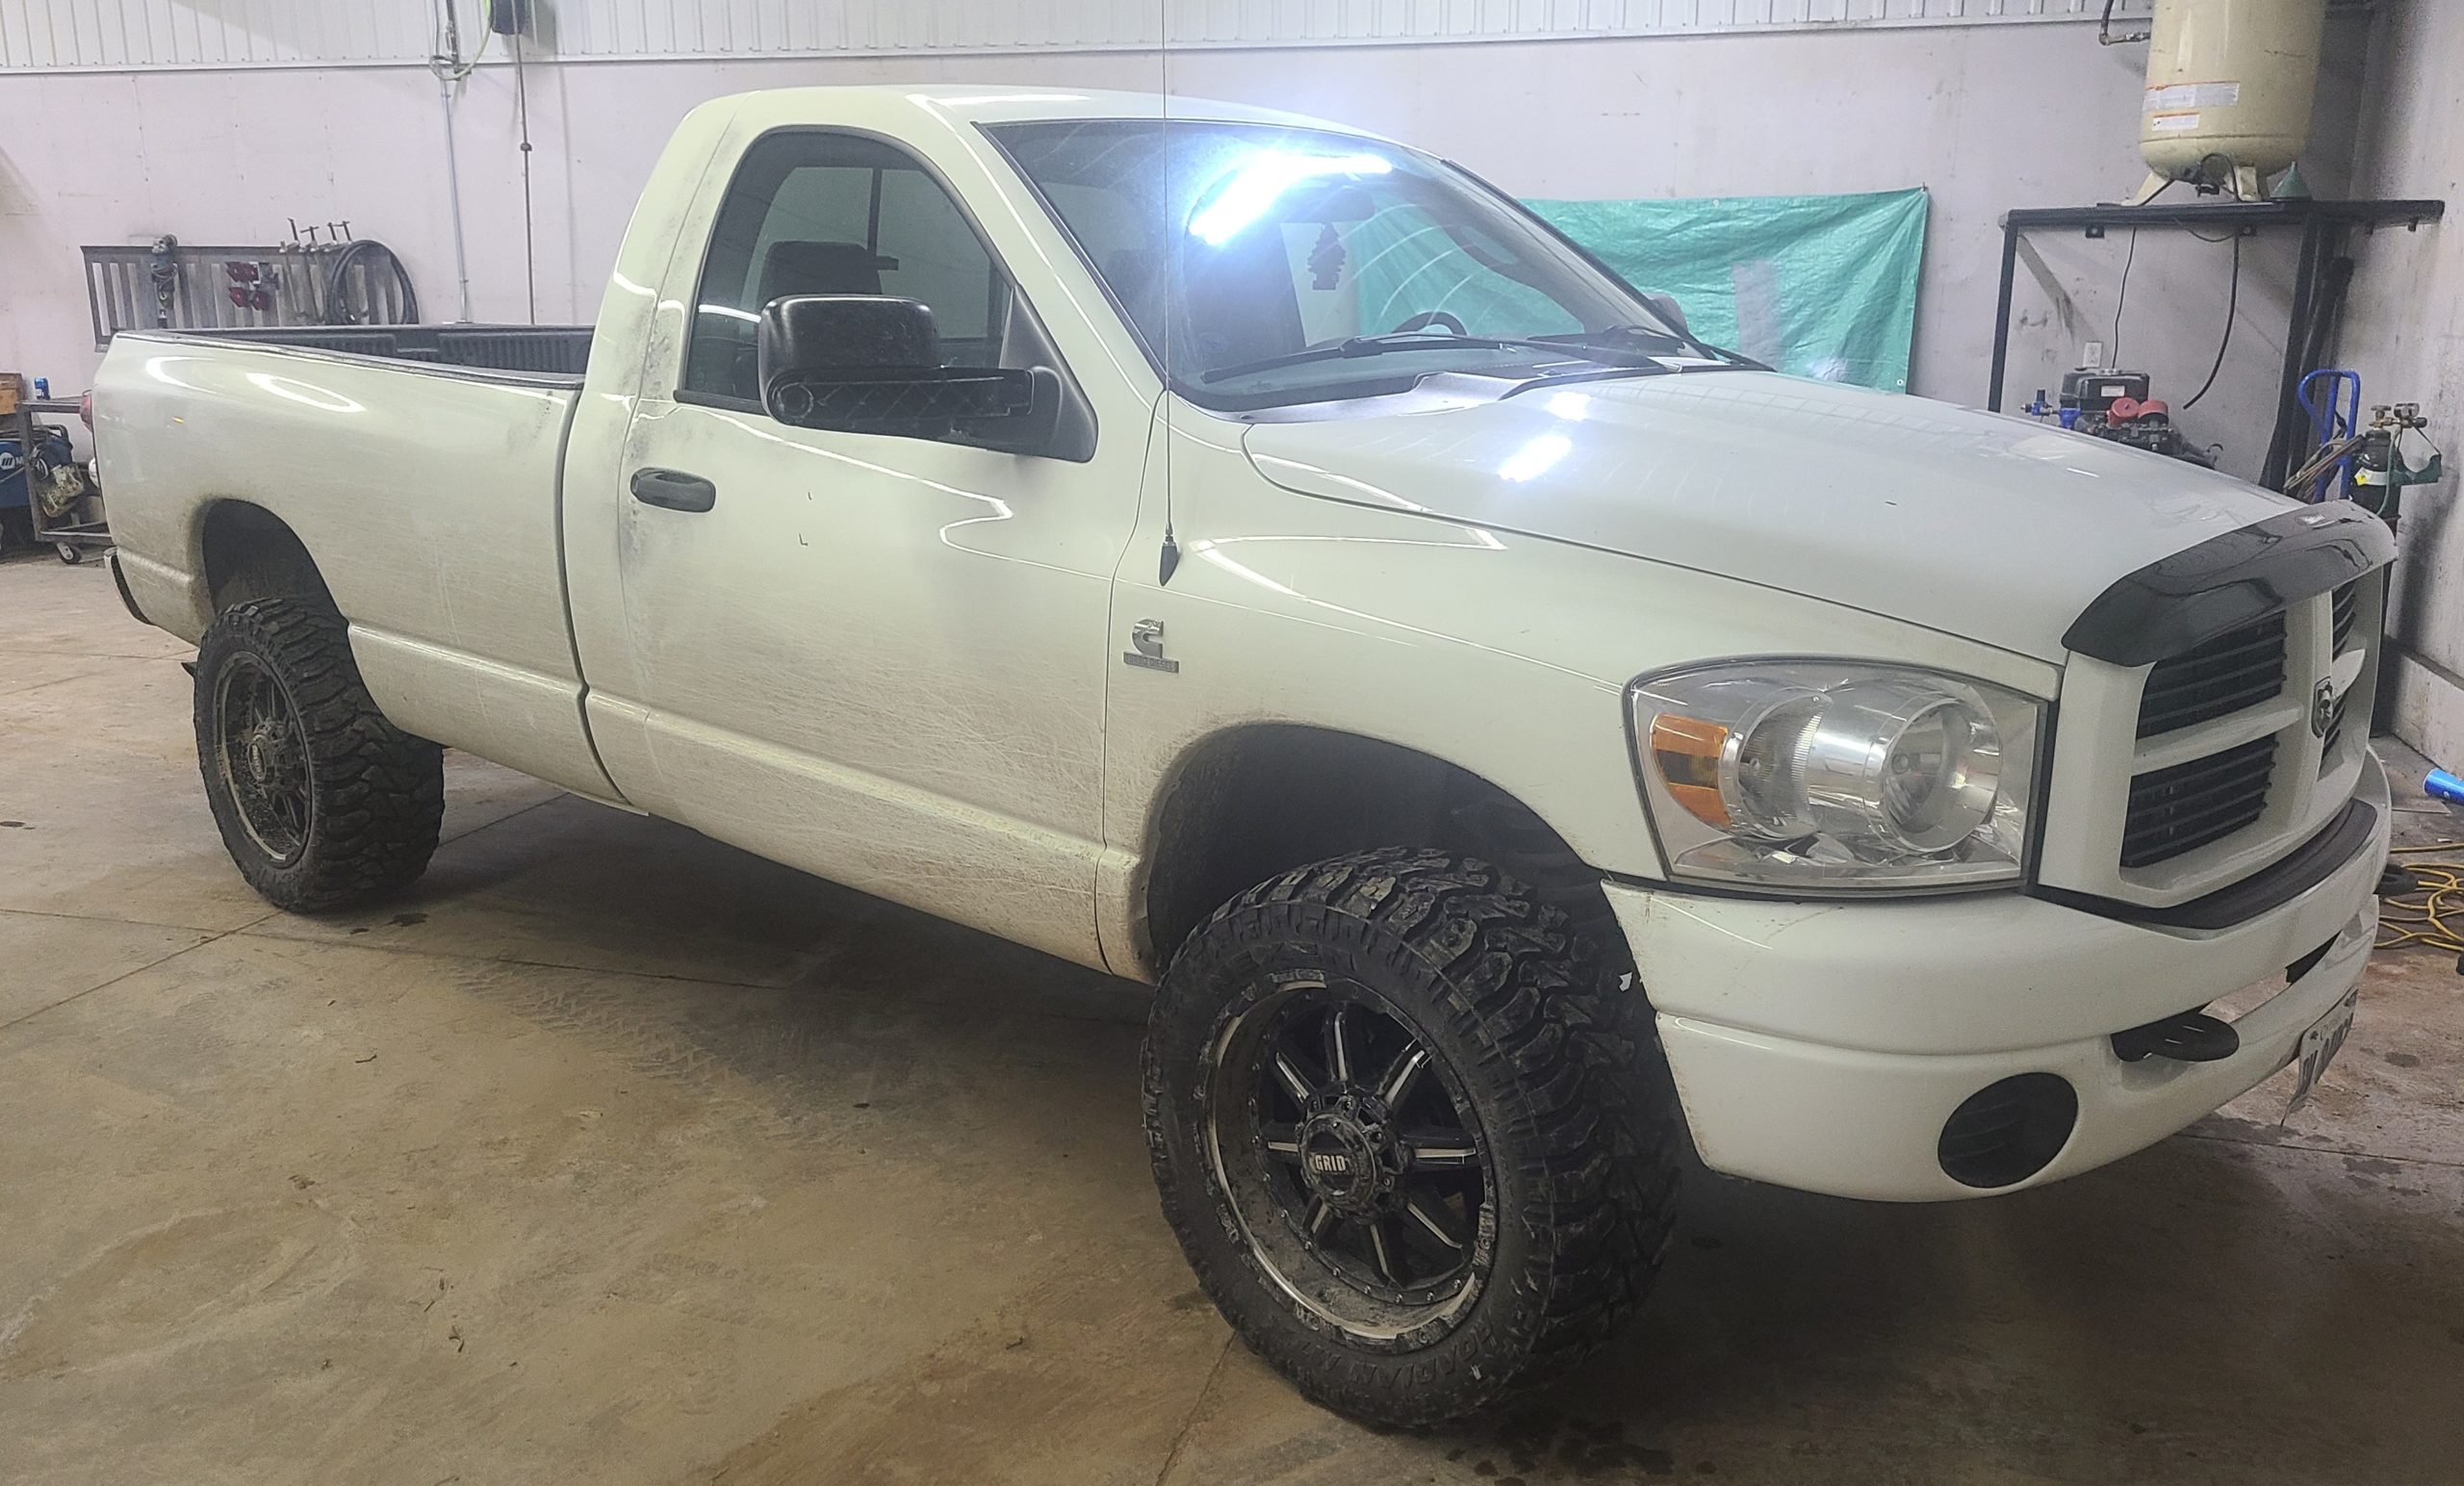 Police looking for stolen pickup